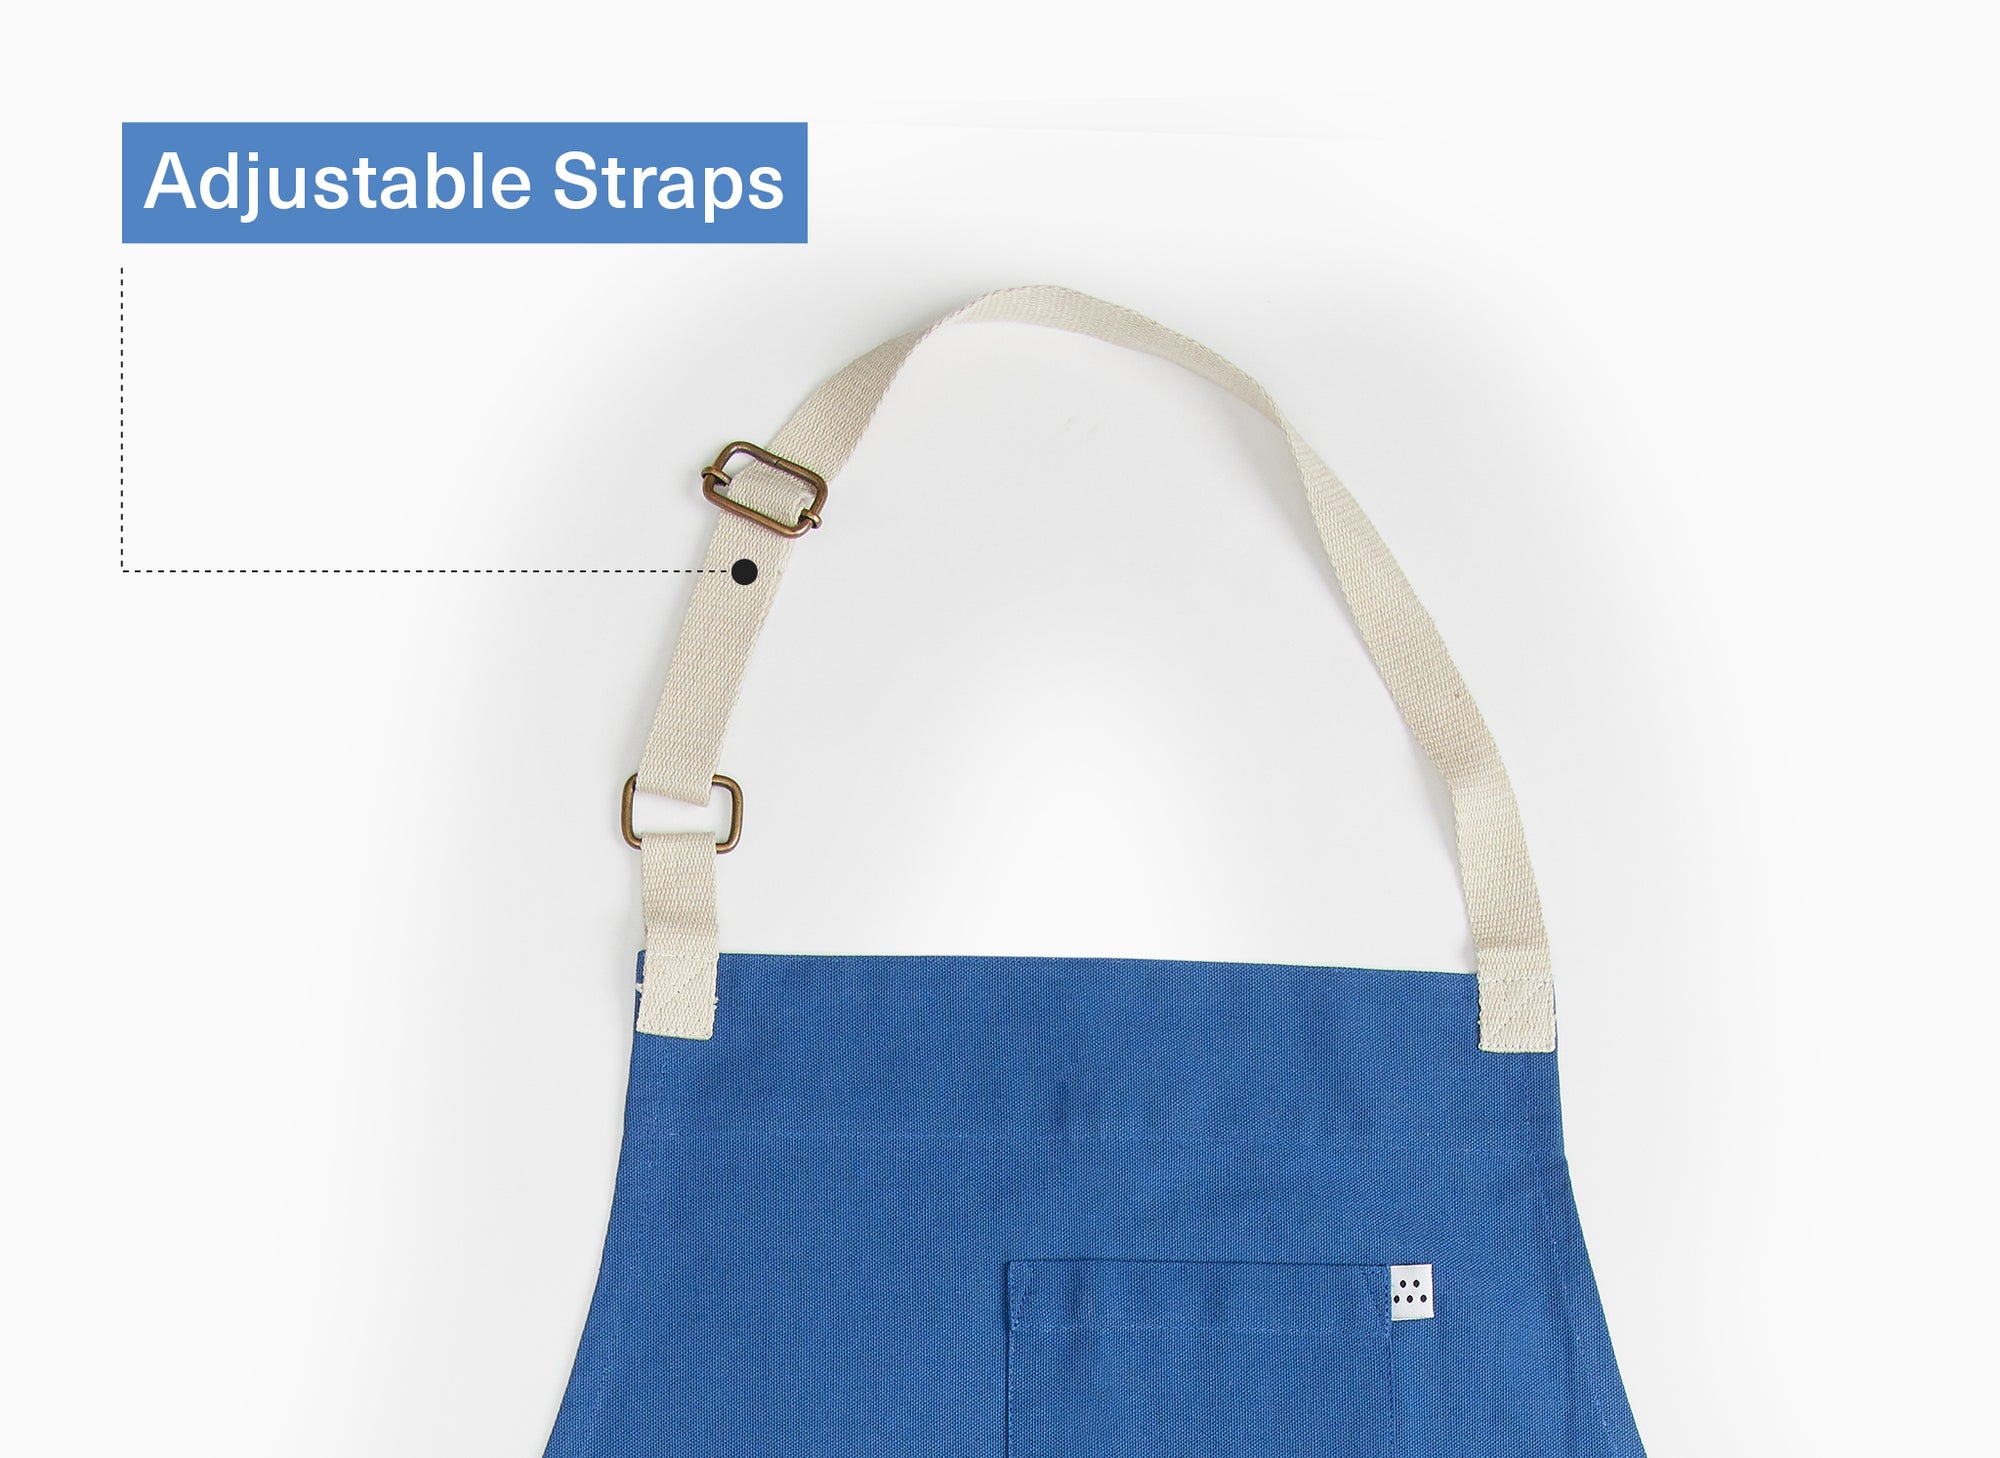 Misen Apron — with Towel-Lined Pockets